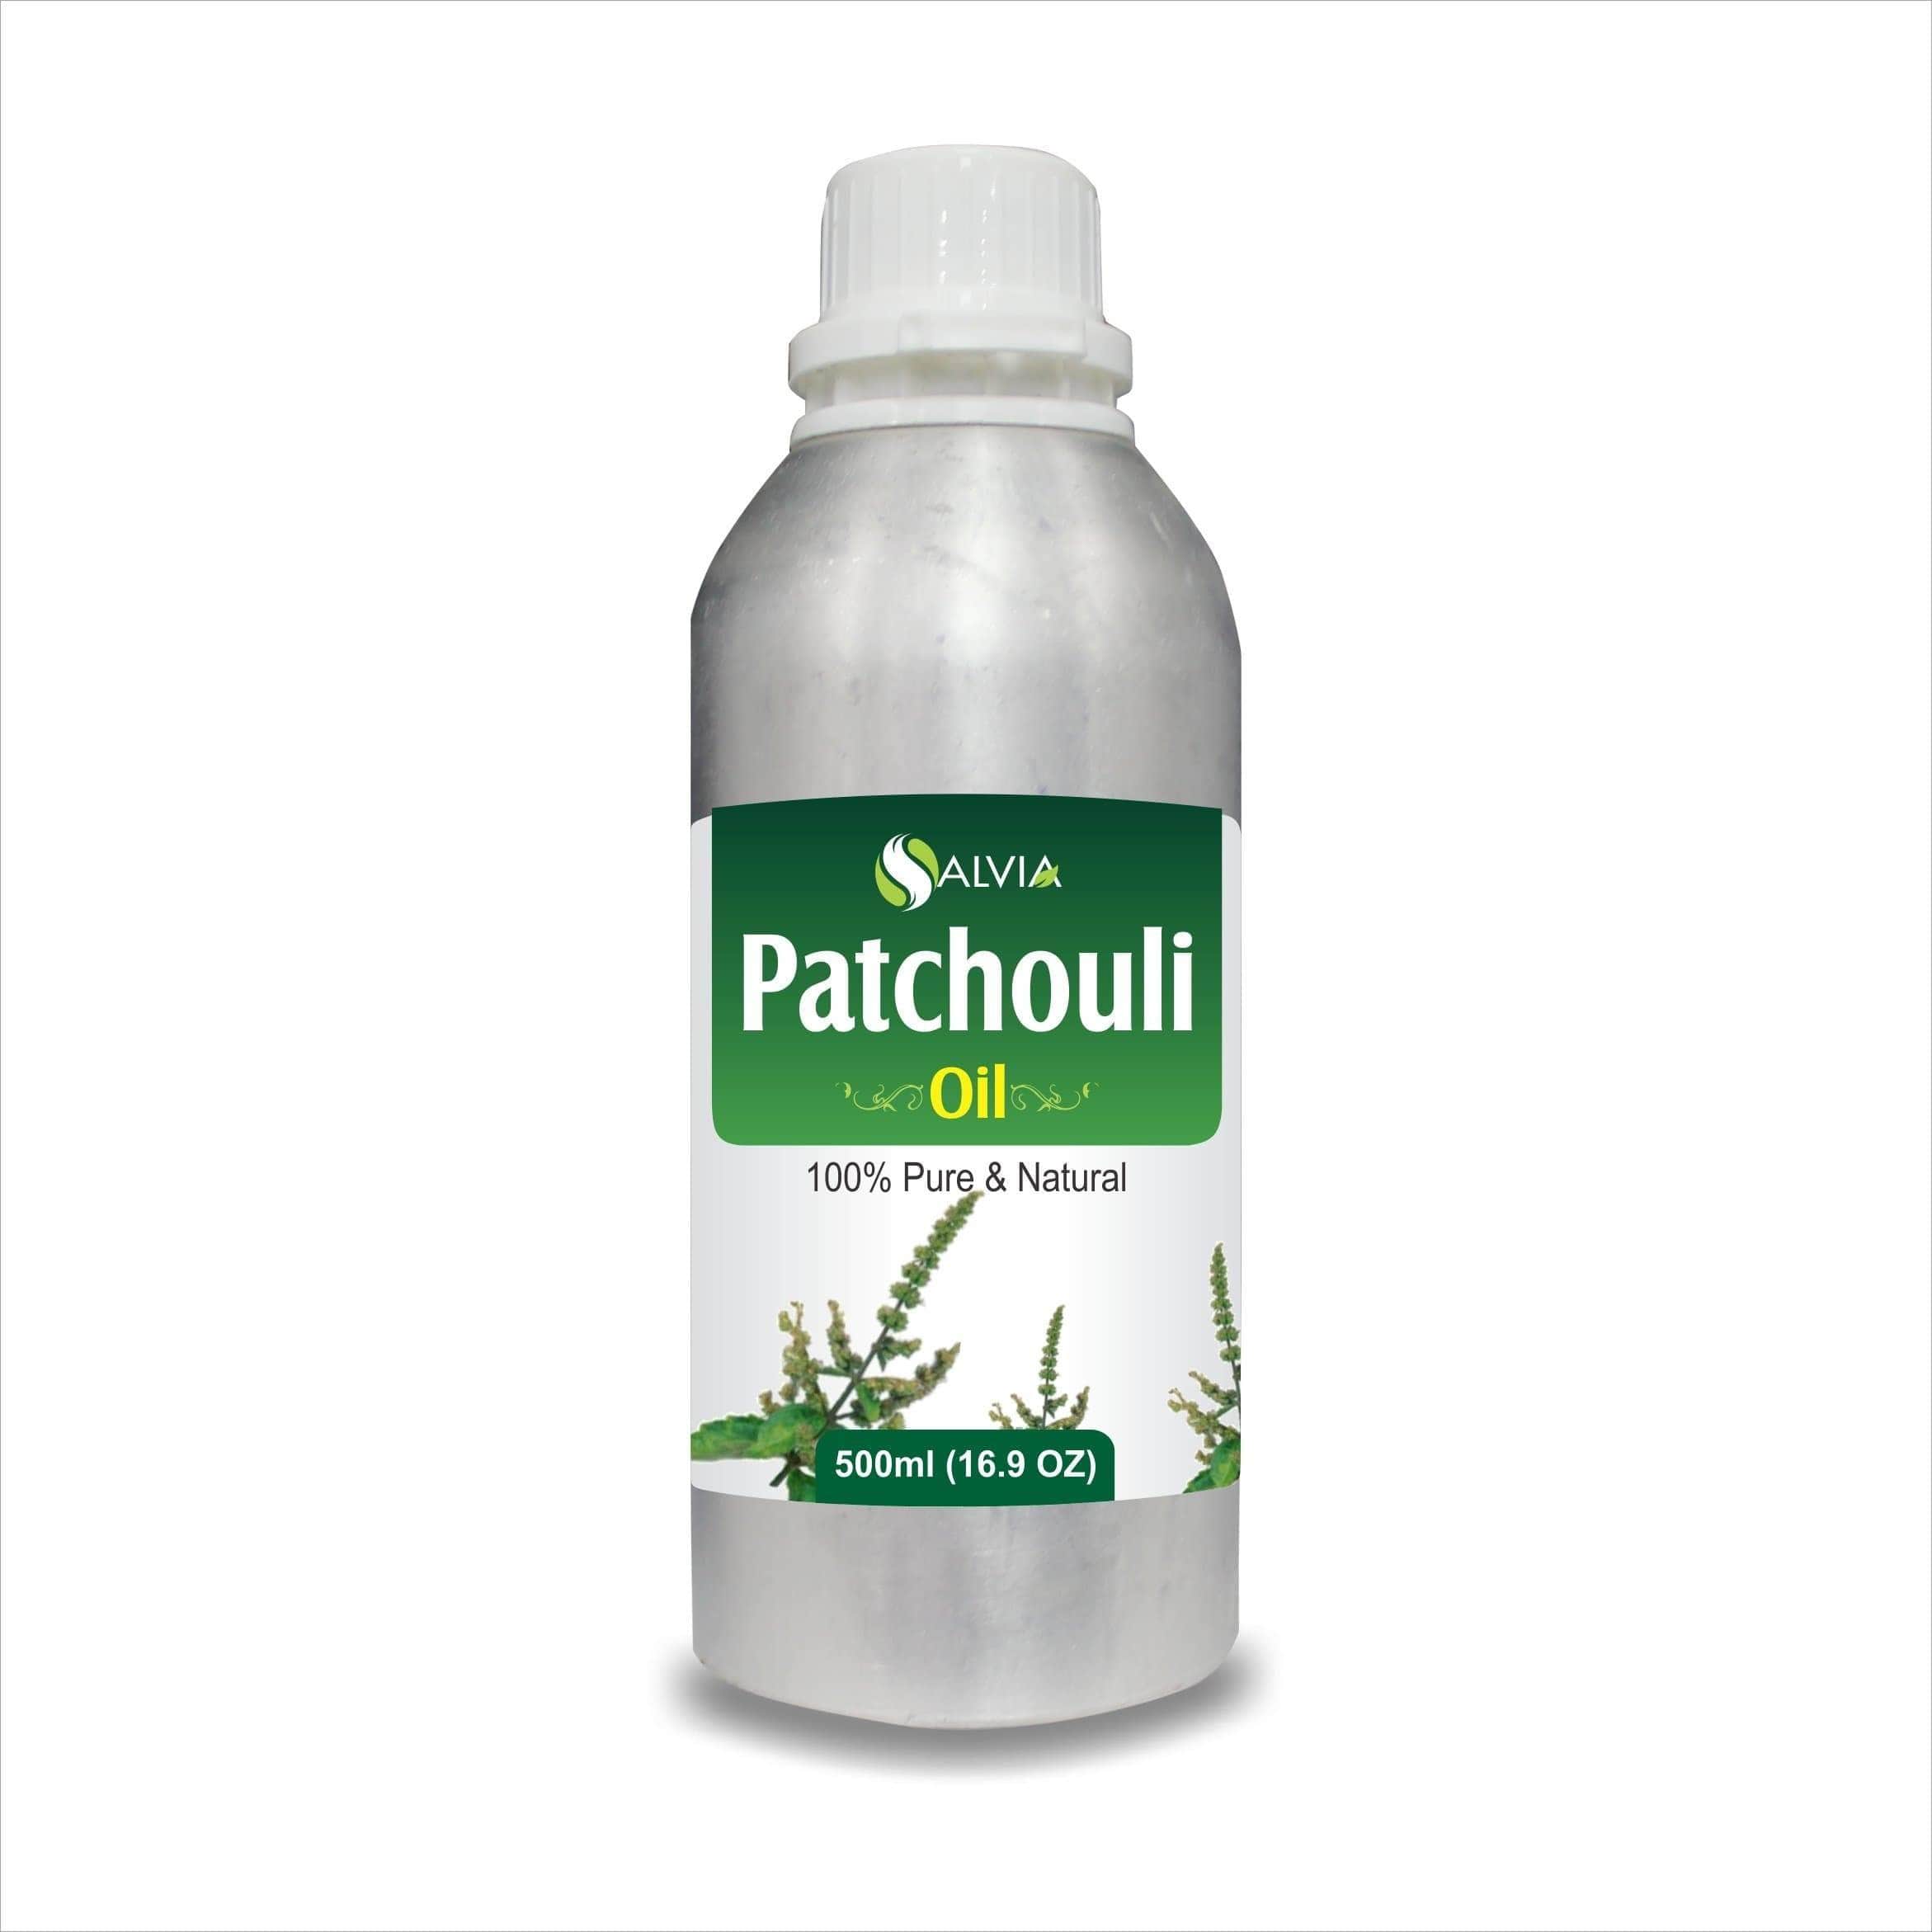 patchouli oil smell